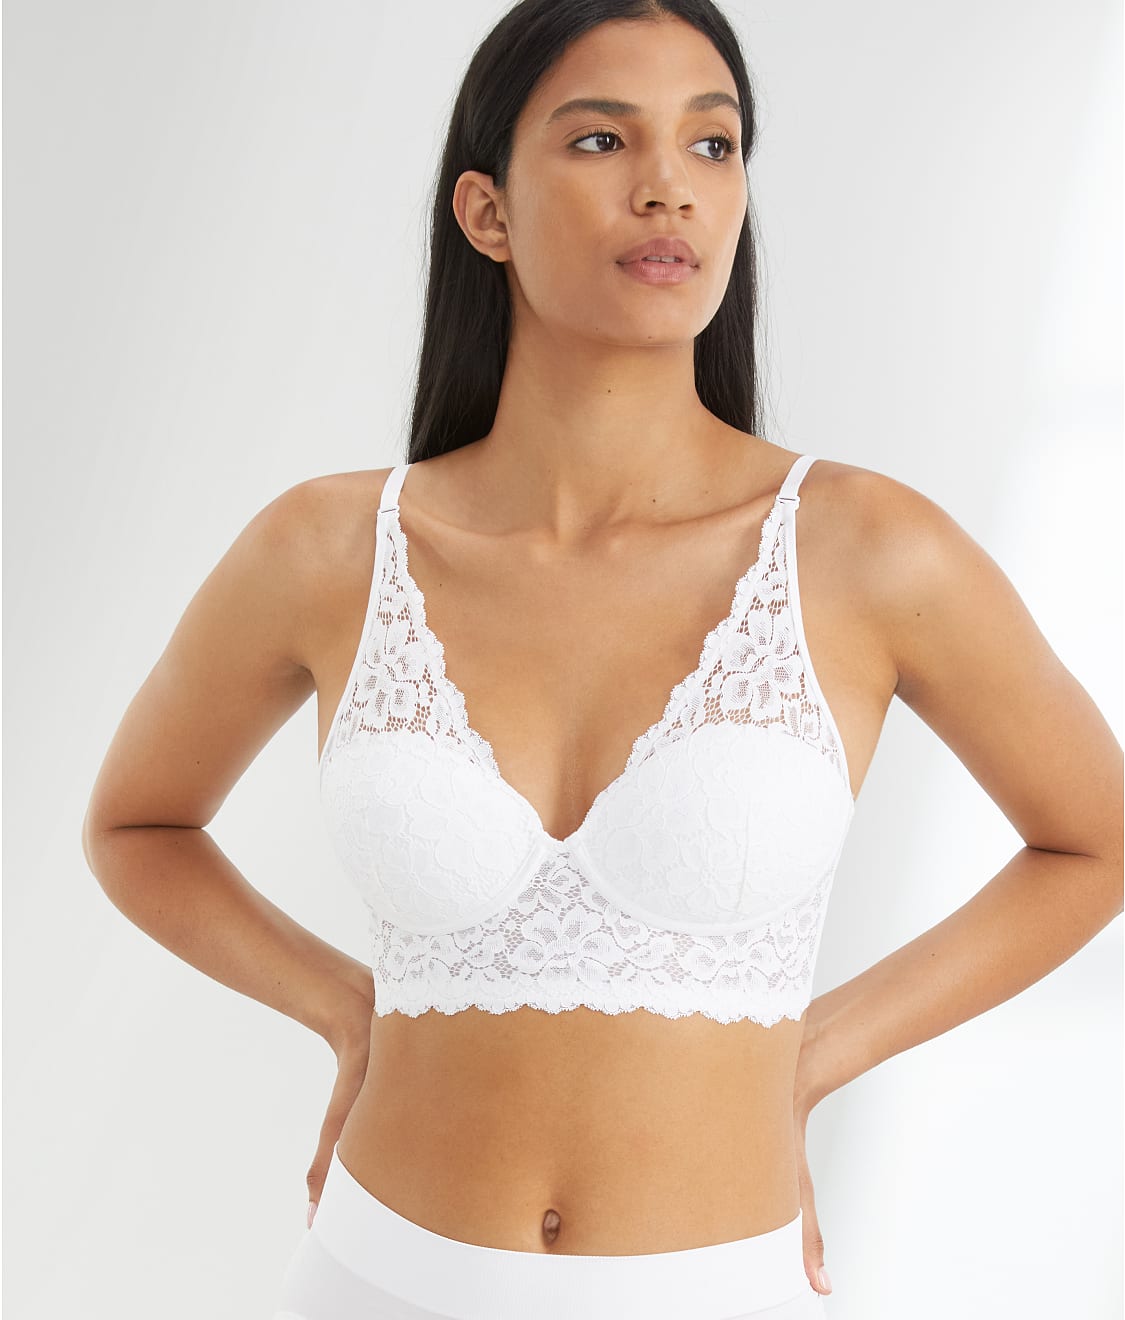 Dominique WHITE Strapless Convertible Smooth Control Bodysuit US 36D